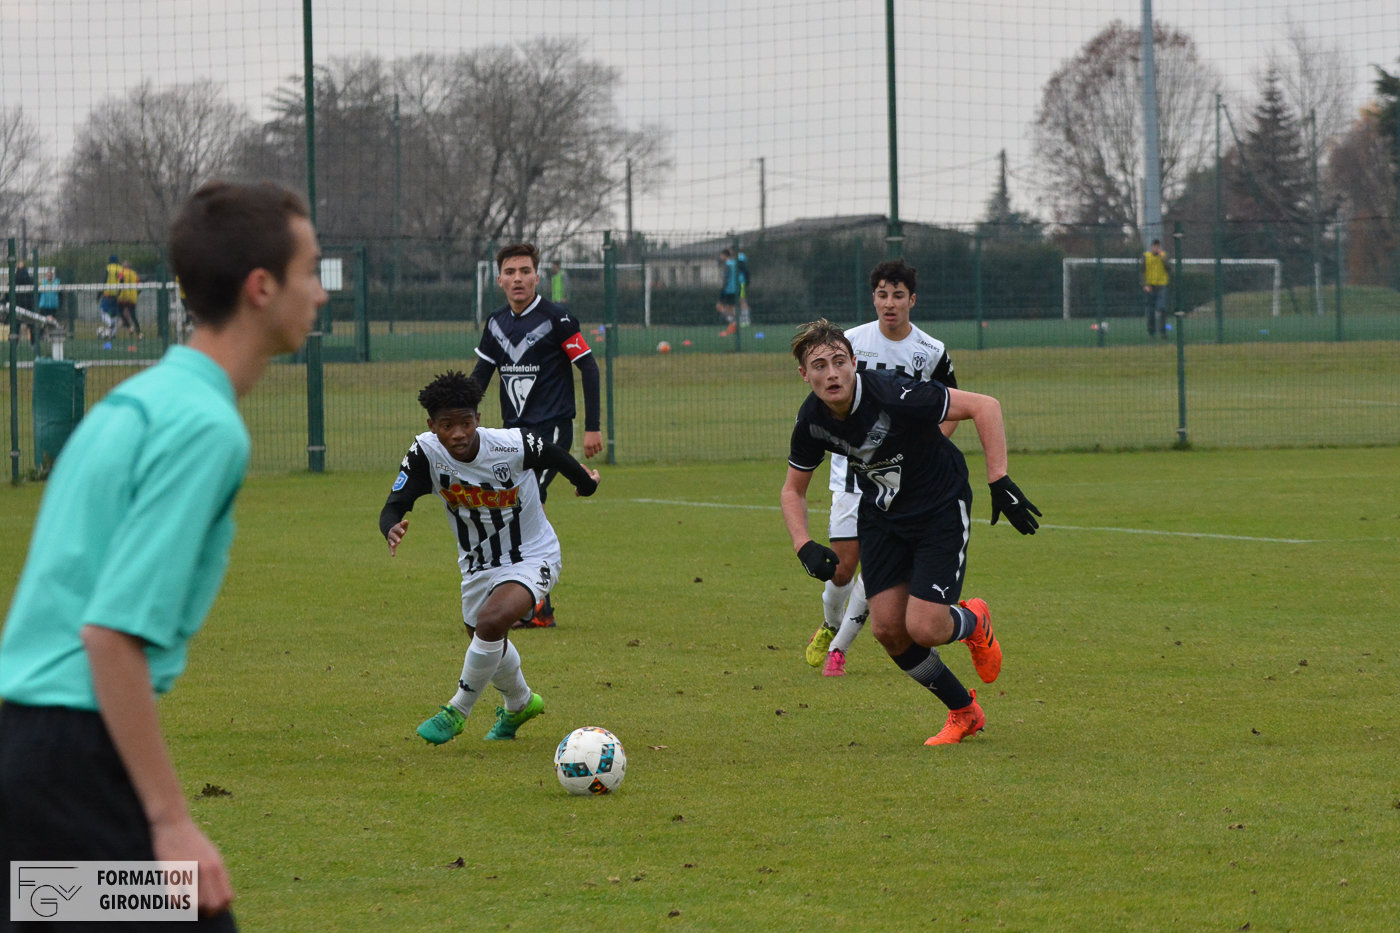 Cfa Girondins : Bordeaux s'incline chez le leader Angers - Formation Girondins 